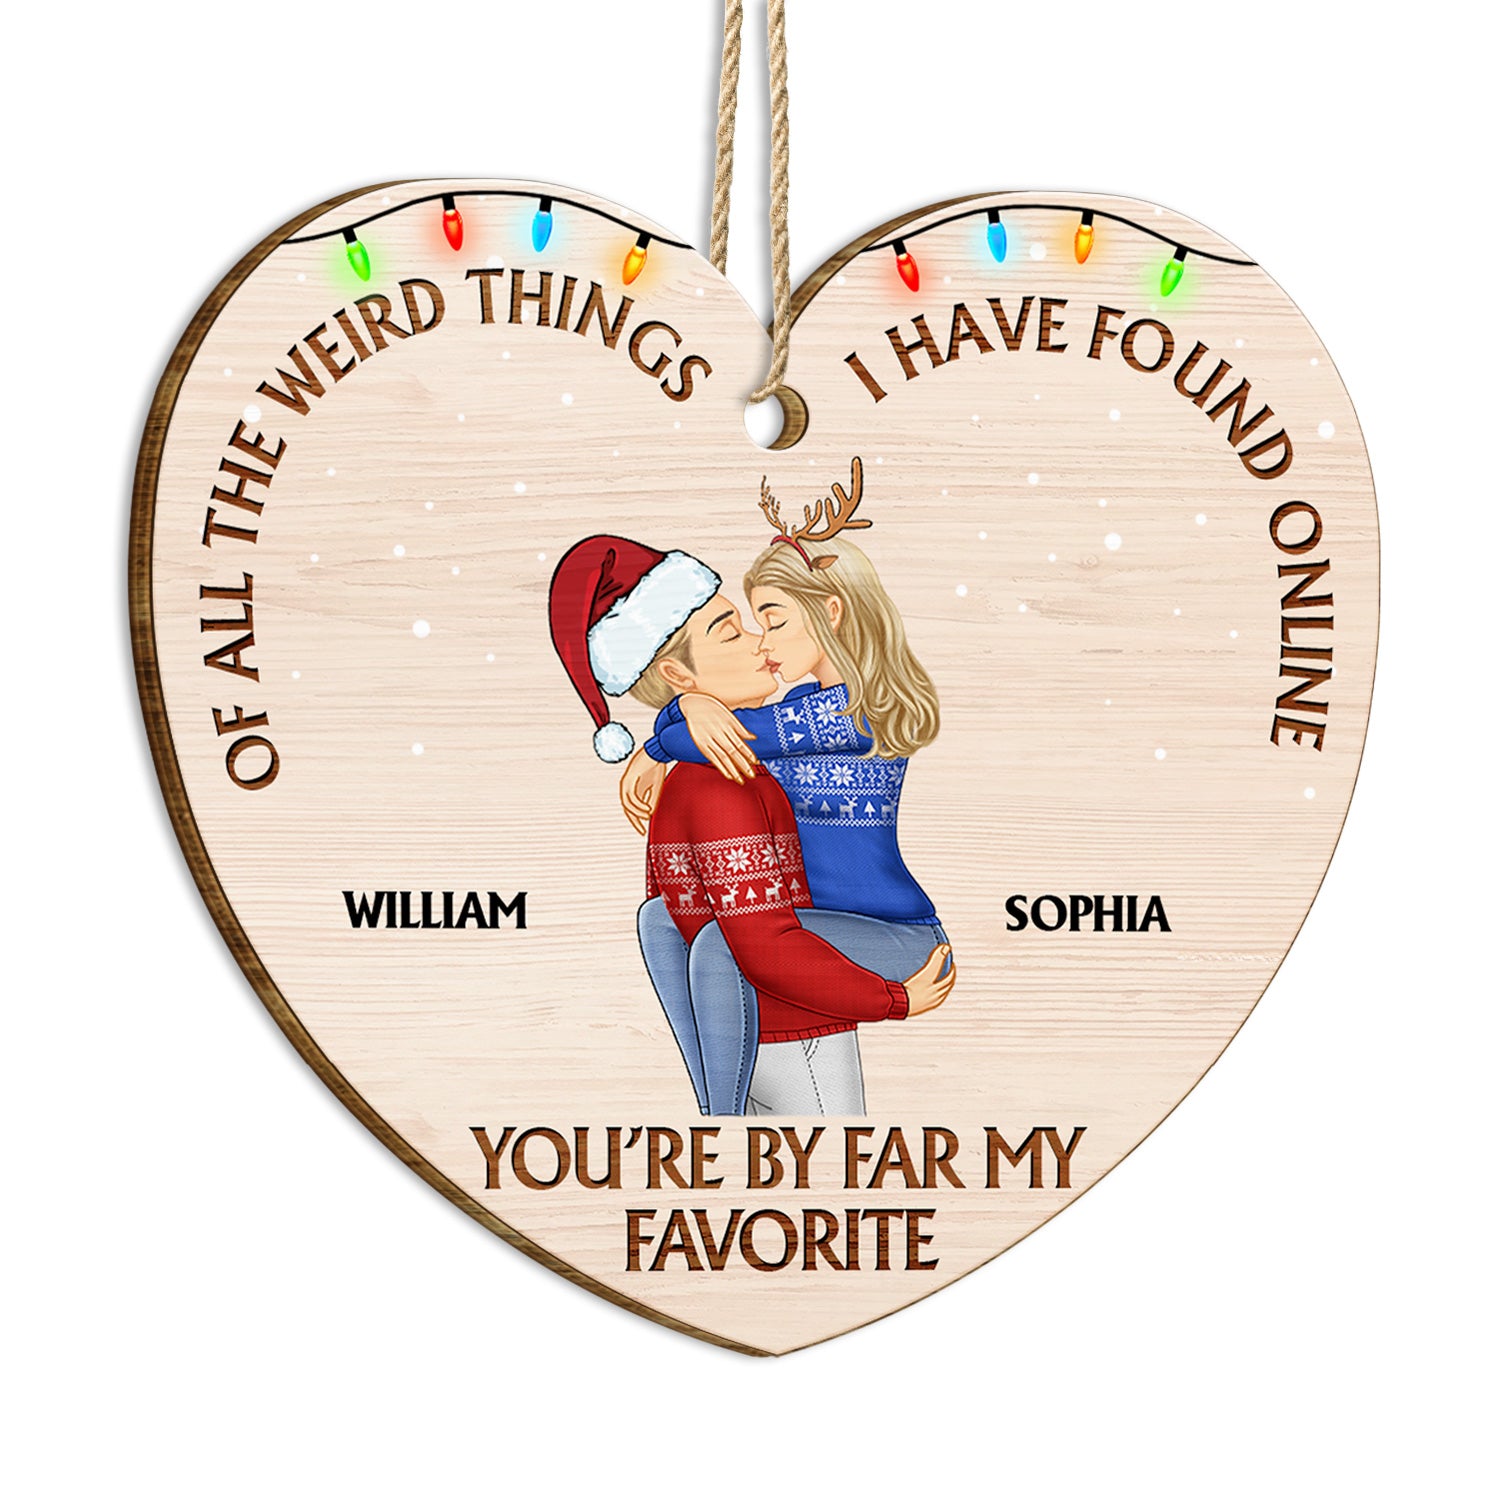 Of All The Weird Things Kissing Couple - Christmas Gift For Couples, Husband, Wife - Personalized Custom Shaped Wooden Ornament